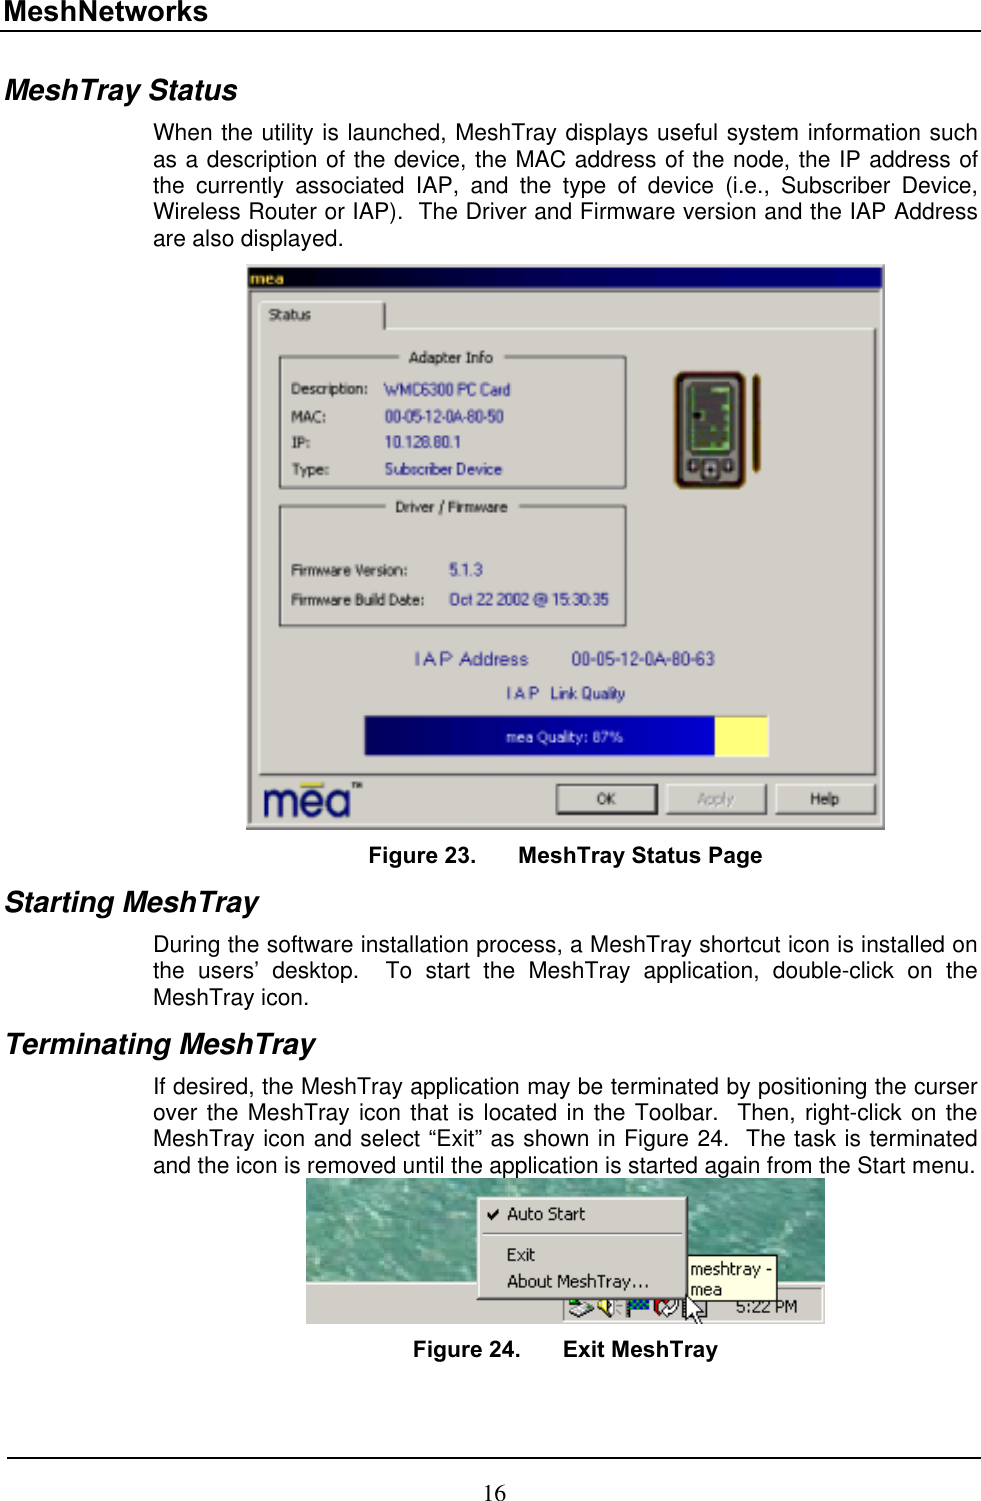 MeshNetworks MeshTray Status When the utility is launched, MeshTray displays useful system information such as a description of the device, the MAC address of the node, the IP address of the currently associated IAP, and the type of device (i.e., Subscriber Device, Wireless Router or IAP).  The Driver and Firmware version and the IAP Address are also displayed.    Figure 23.  MeshTray Status Page Starting MeshTray During the software installation process, a MeshTray shortcut icon is installed on the users’ desktop.  To start the MeshTray application, double-click on the MeshTray icon. Terminating MeshTray If desired, the MeshTray application may be terminated by positioning the curser over the MeshTray icon that is located in the Toolbar.  Then, right-click on the MeshTray icon and select “Exit” as shown in Figure 24.  The task is terminated and the icon is removed until the application is started again from the Start menu.  Figure 24.  Exit MeshTray 16 